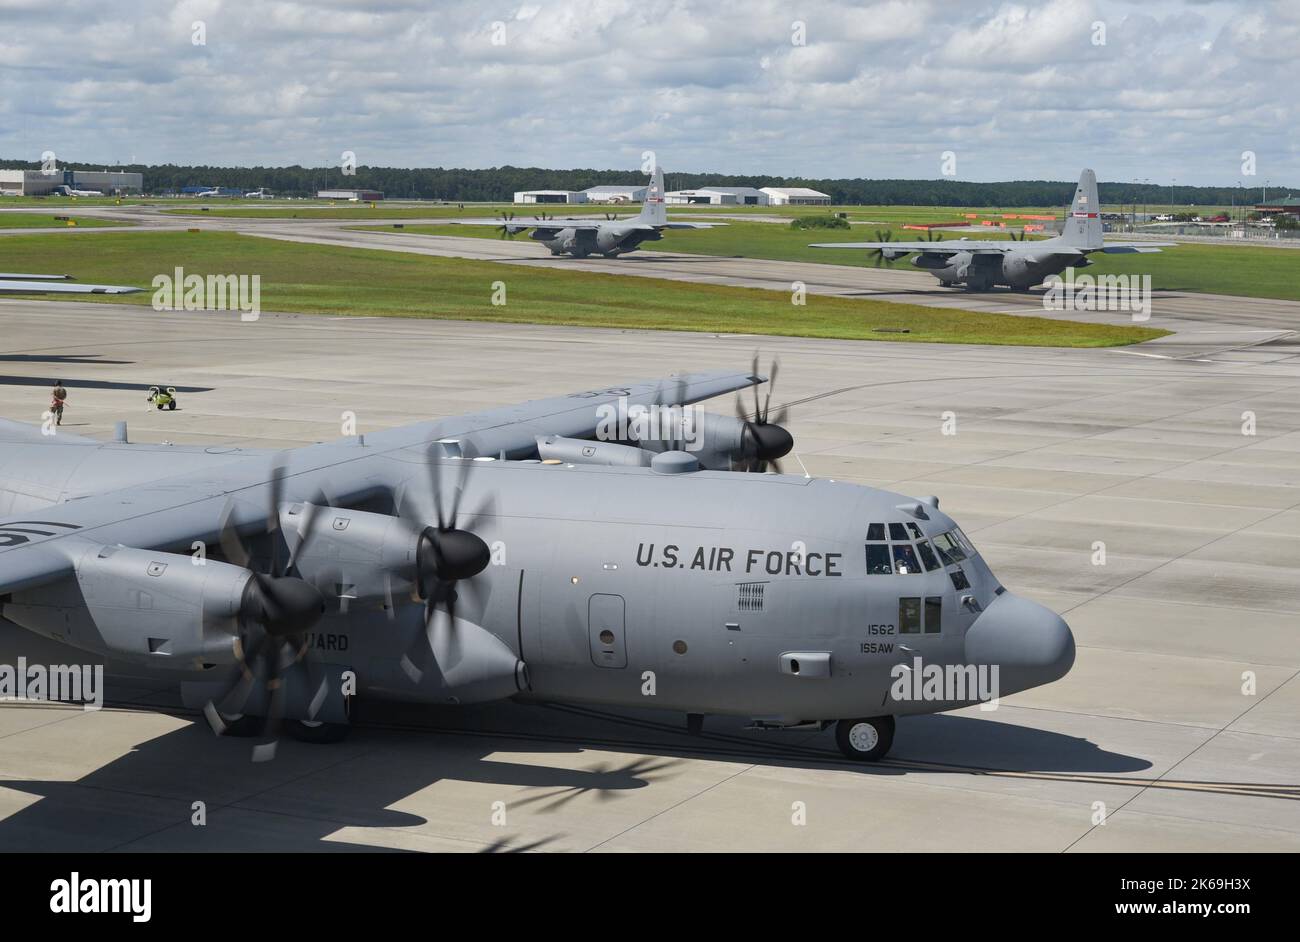 Three C-130 Hercules from the 165th Airlift Wing begin pre-flight engine checks on the flight line in Savannah, Georgia, September 11, 2022. The 165th AW recently completed the second phase of the modernization process that transitioned the C-130s from four-bladed propellers to eight-bladed propellers. The eight-bladed propellers will deliver more power and efficiency while reducing maintenance. (U.S. Air National Guard photo by Capt. Joseph Truschelli) Stock Photo